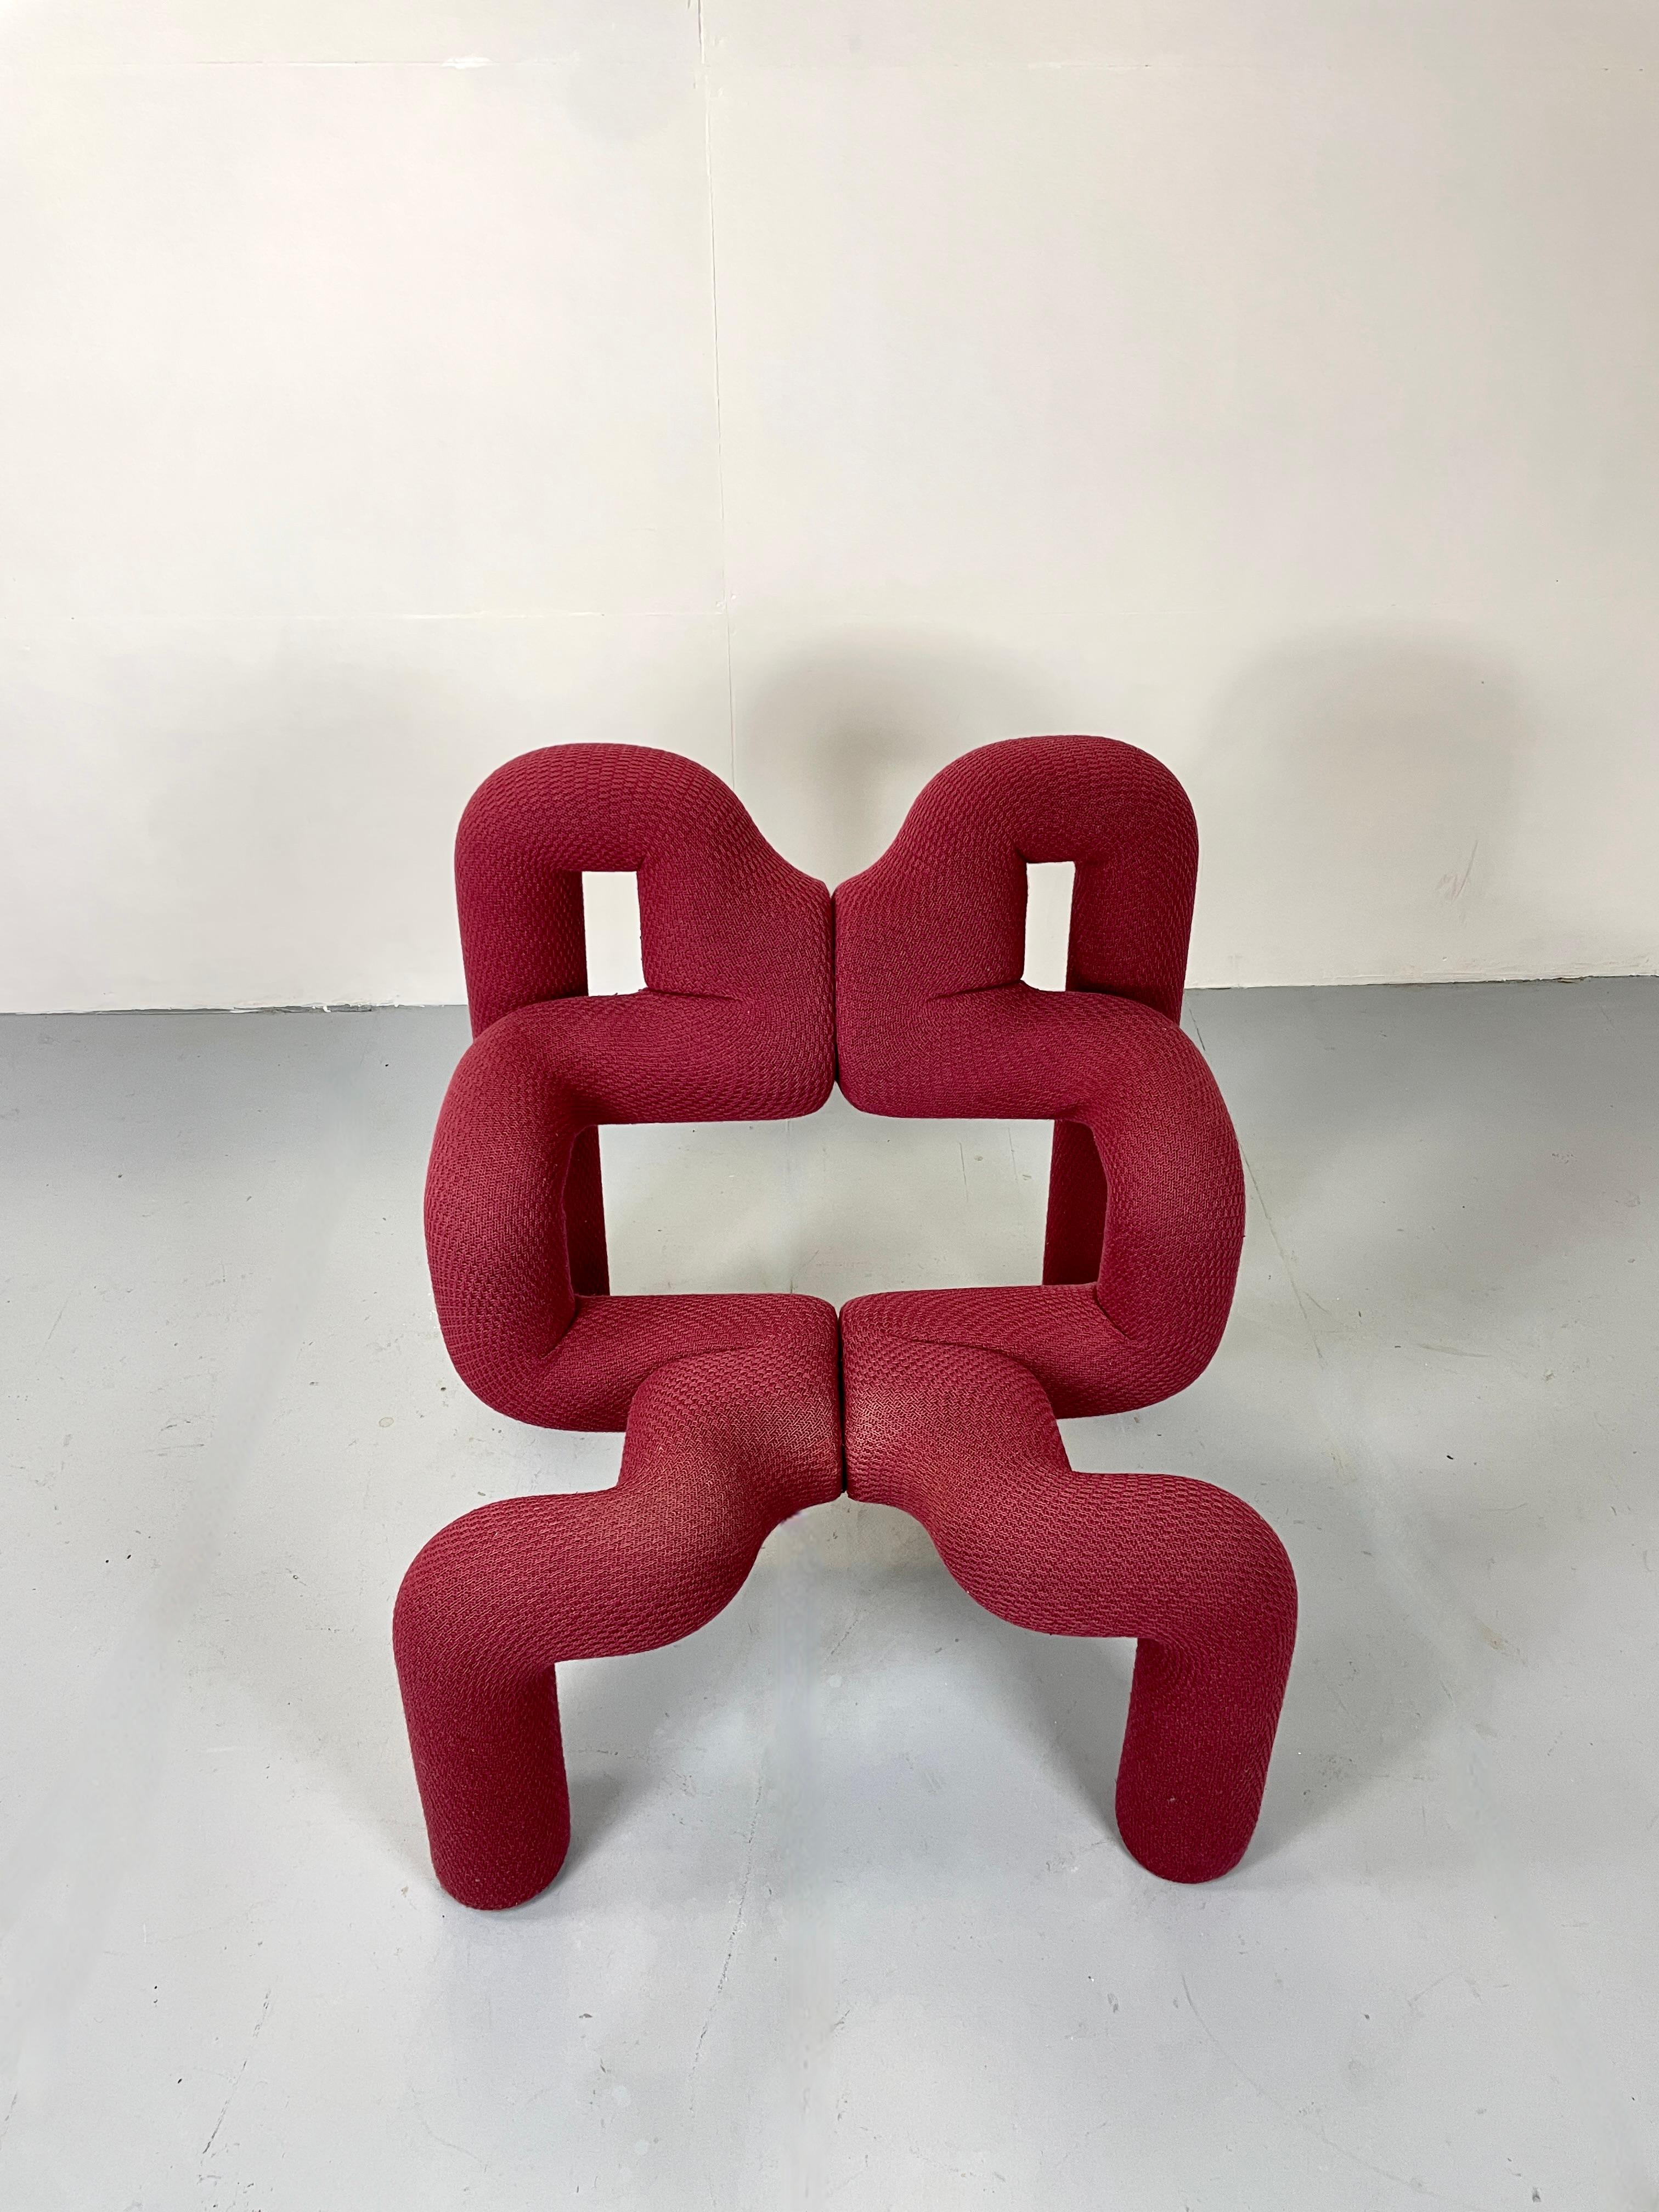 Iconic Ekstrem chair from Terje Ekstrom which was handcrafted in Norway. 

The chair is still in his original upholstery. 

The color is a nice dark red.